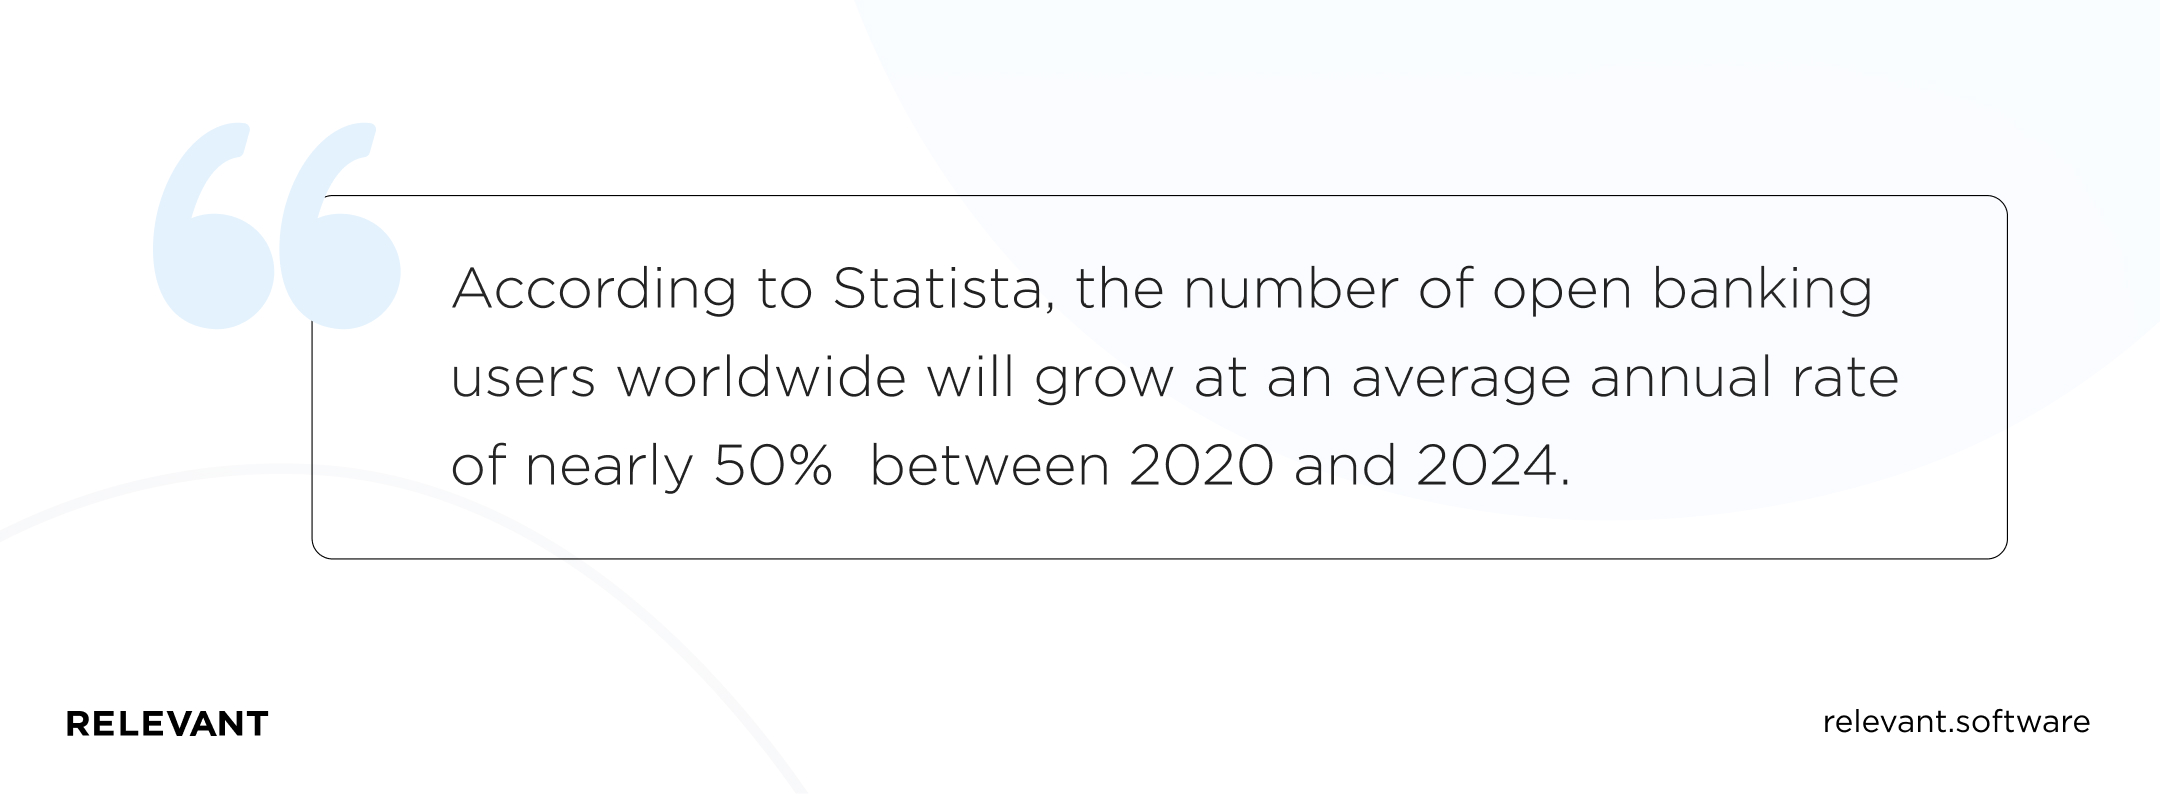 According to Statista, the number of open banking users worldwide will grow at an average annual rate of nearly 50%  between 2020 and 2024.